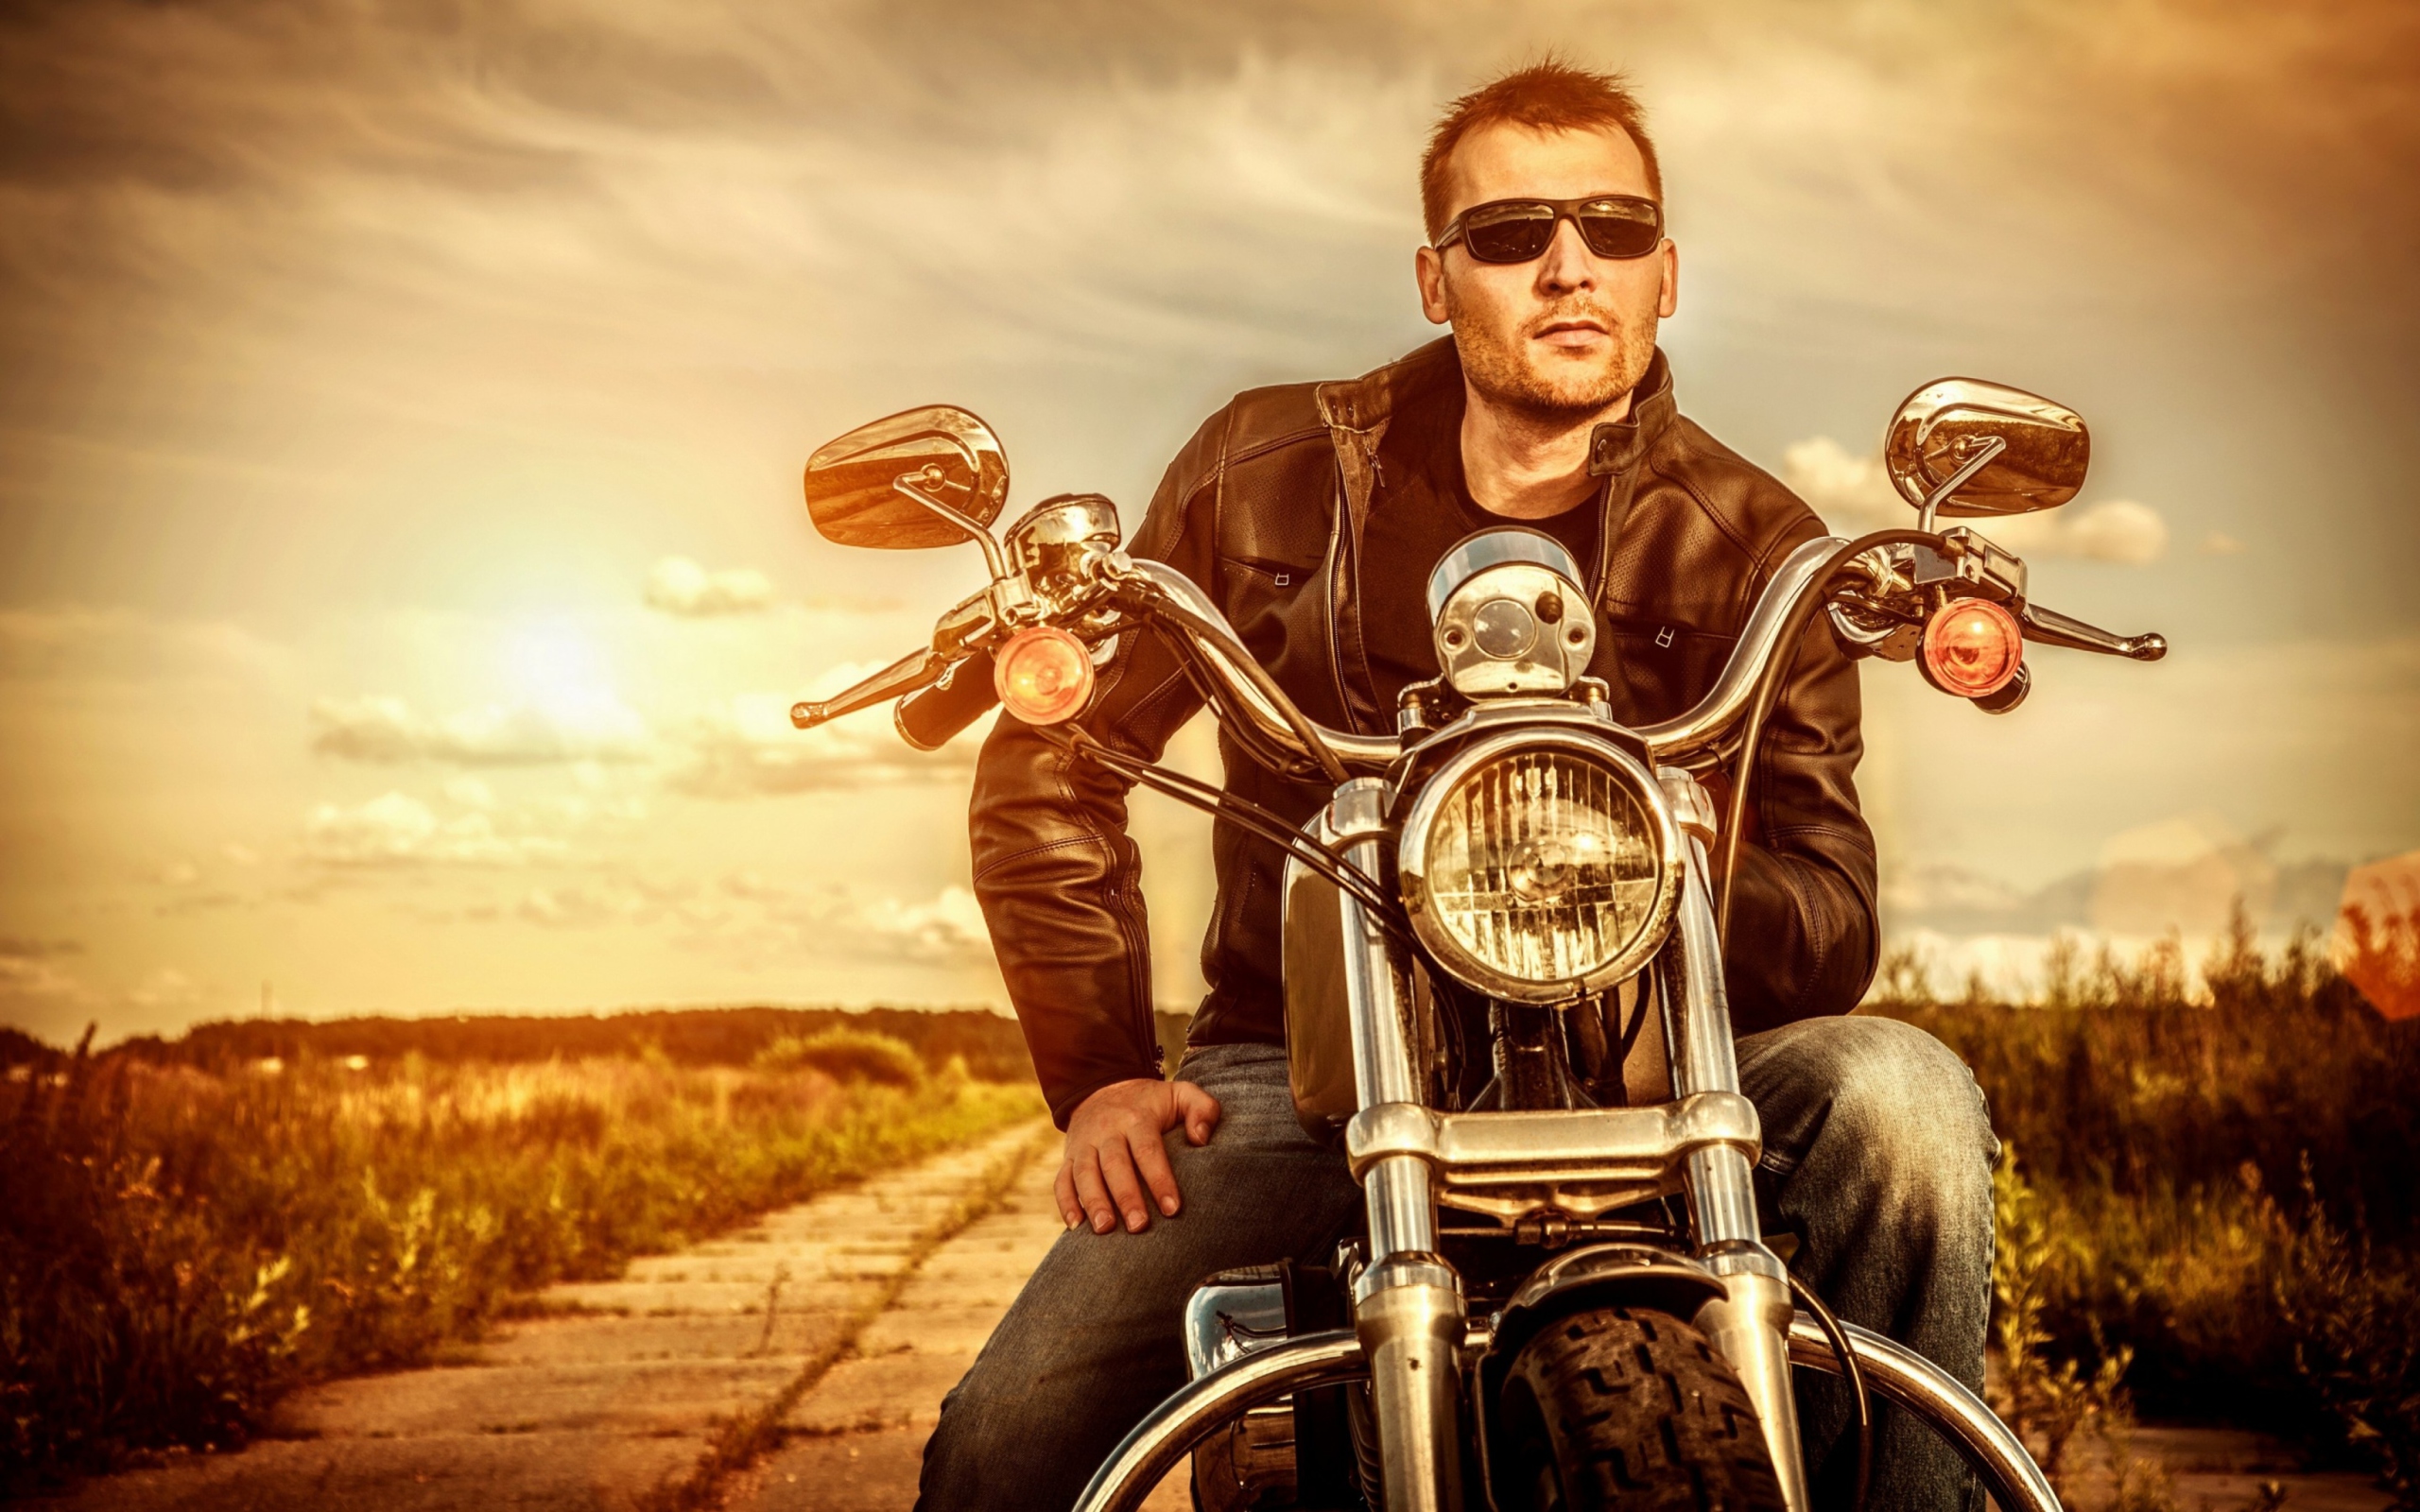 Motorcycle Driver wallpaper 2560x1600